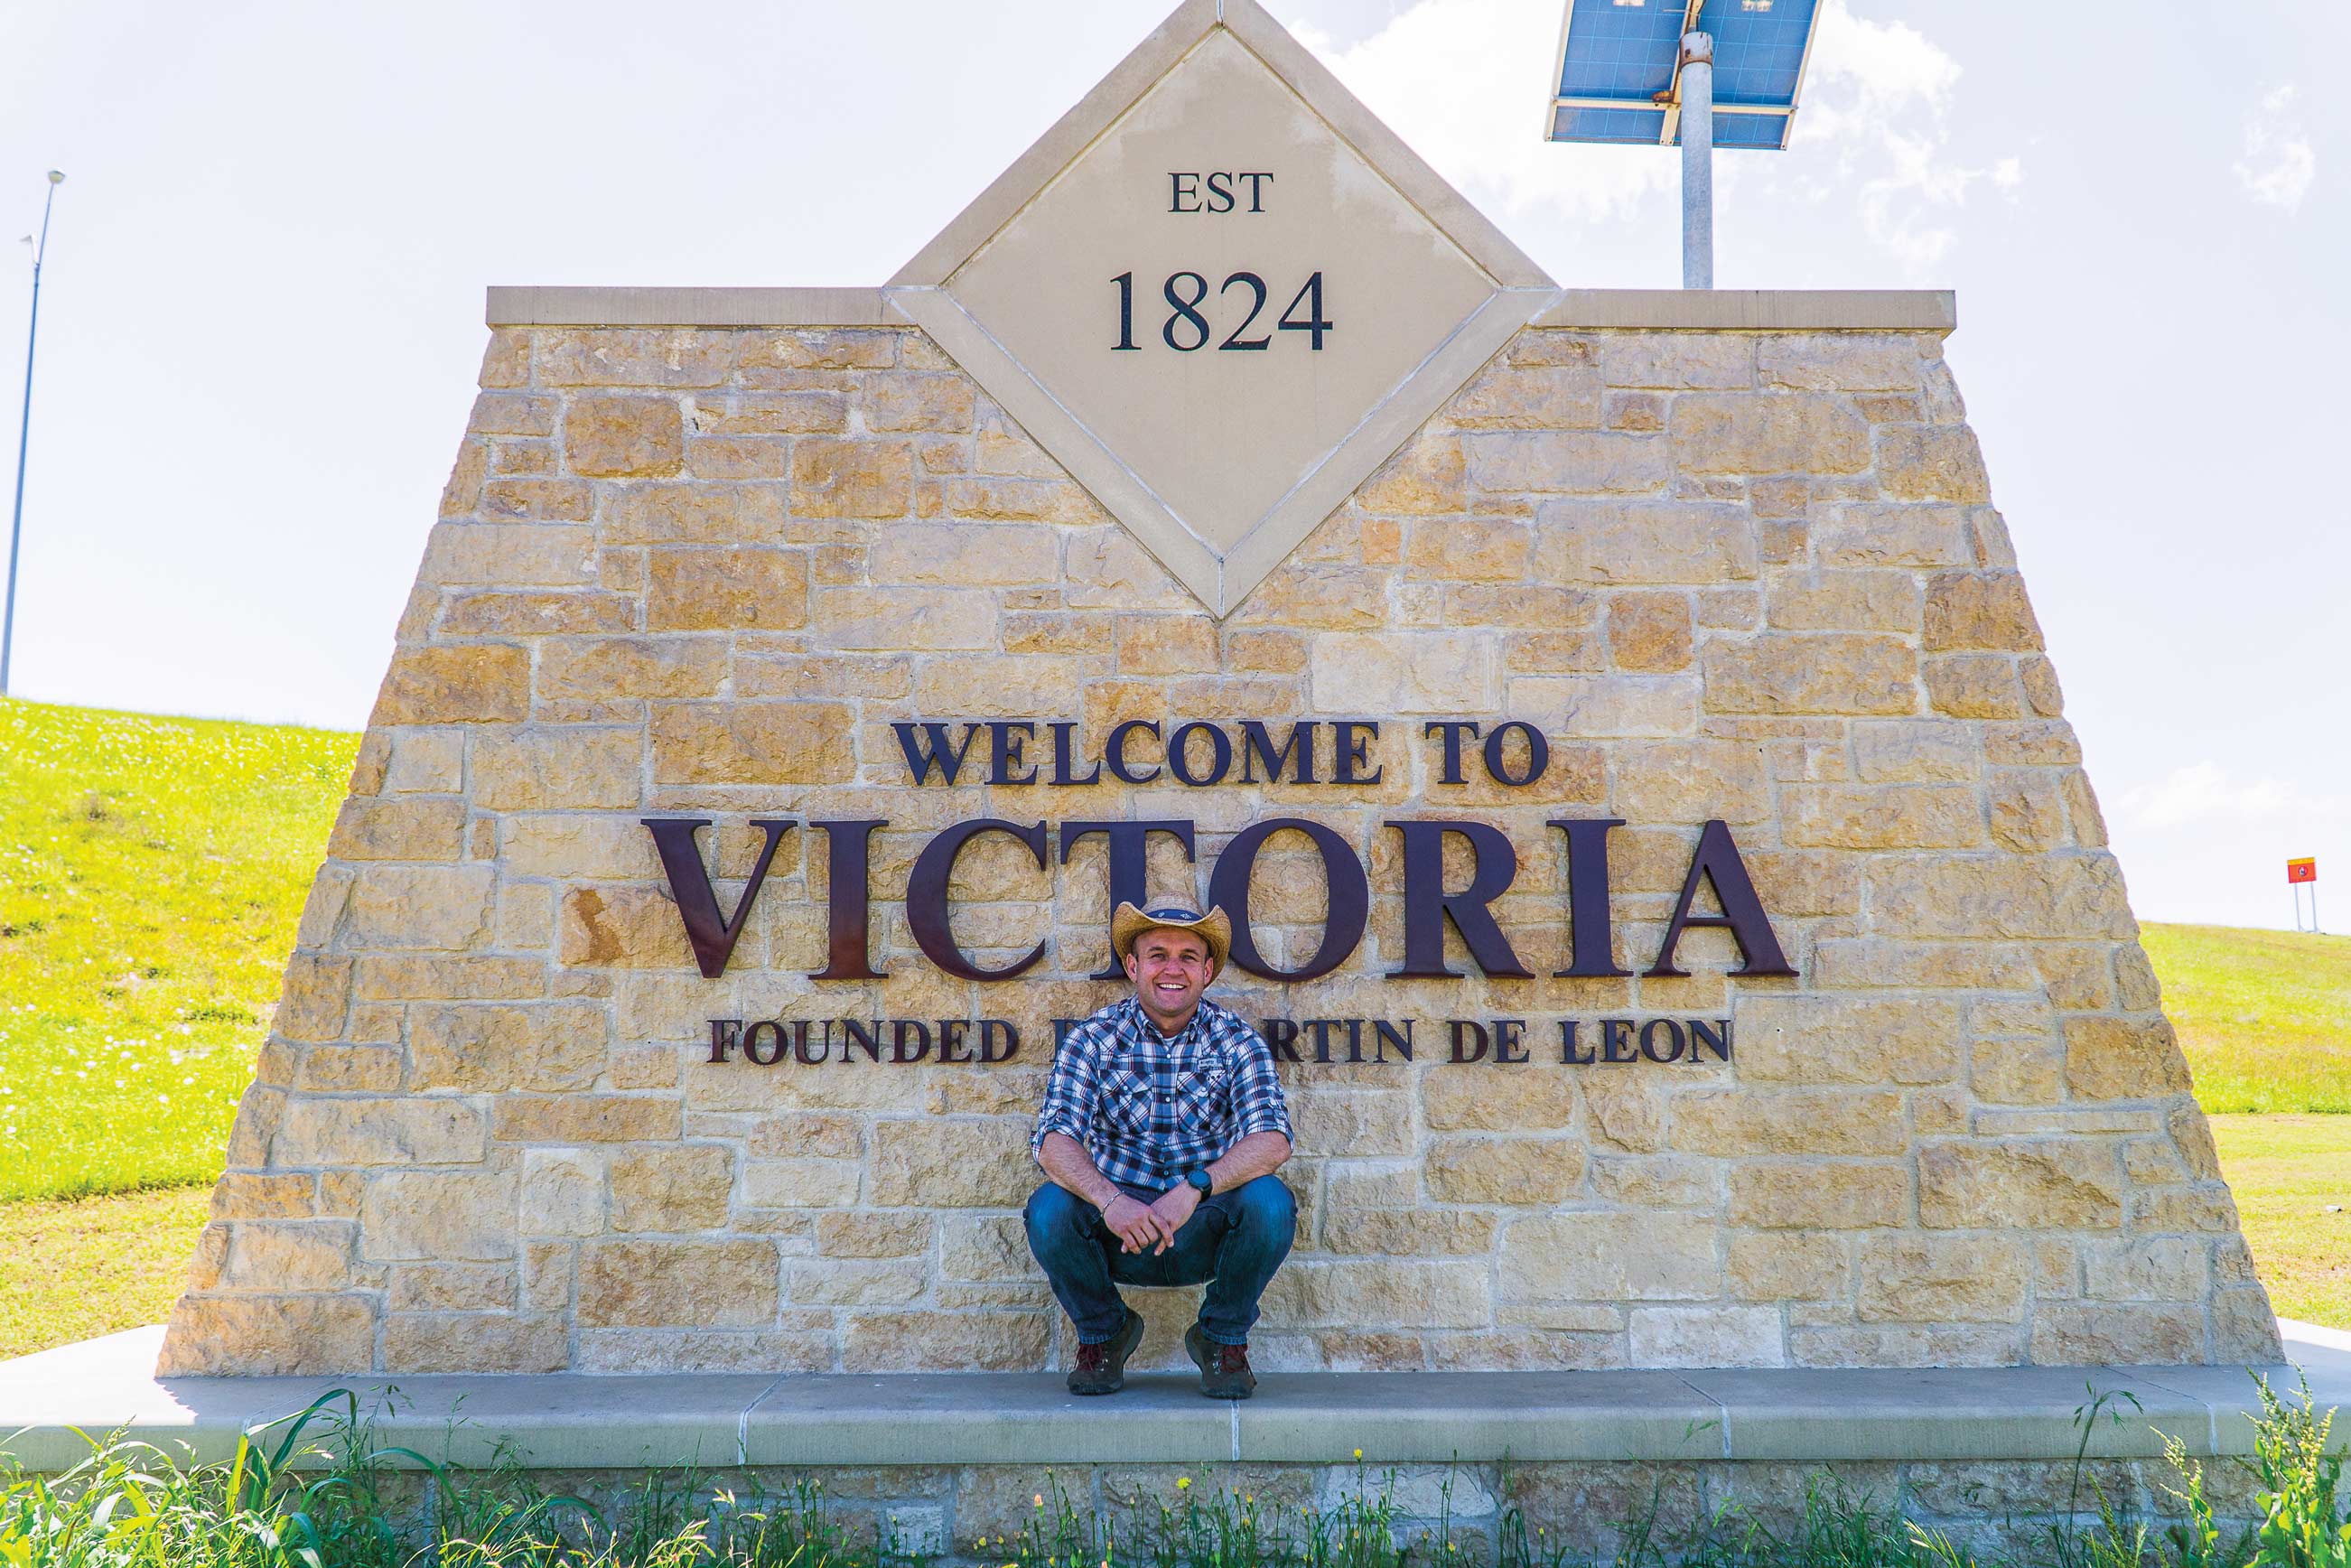 Chet Garner in front of the Welcome to Victoria sign